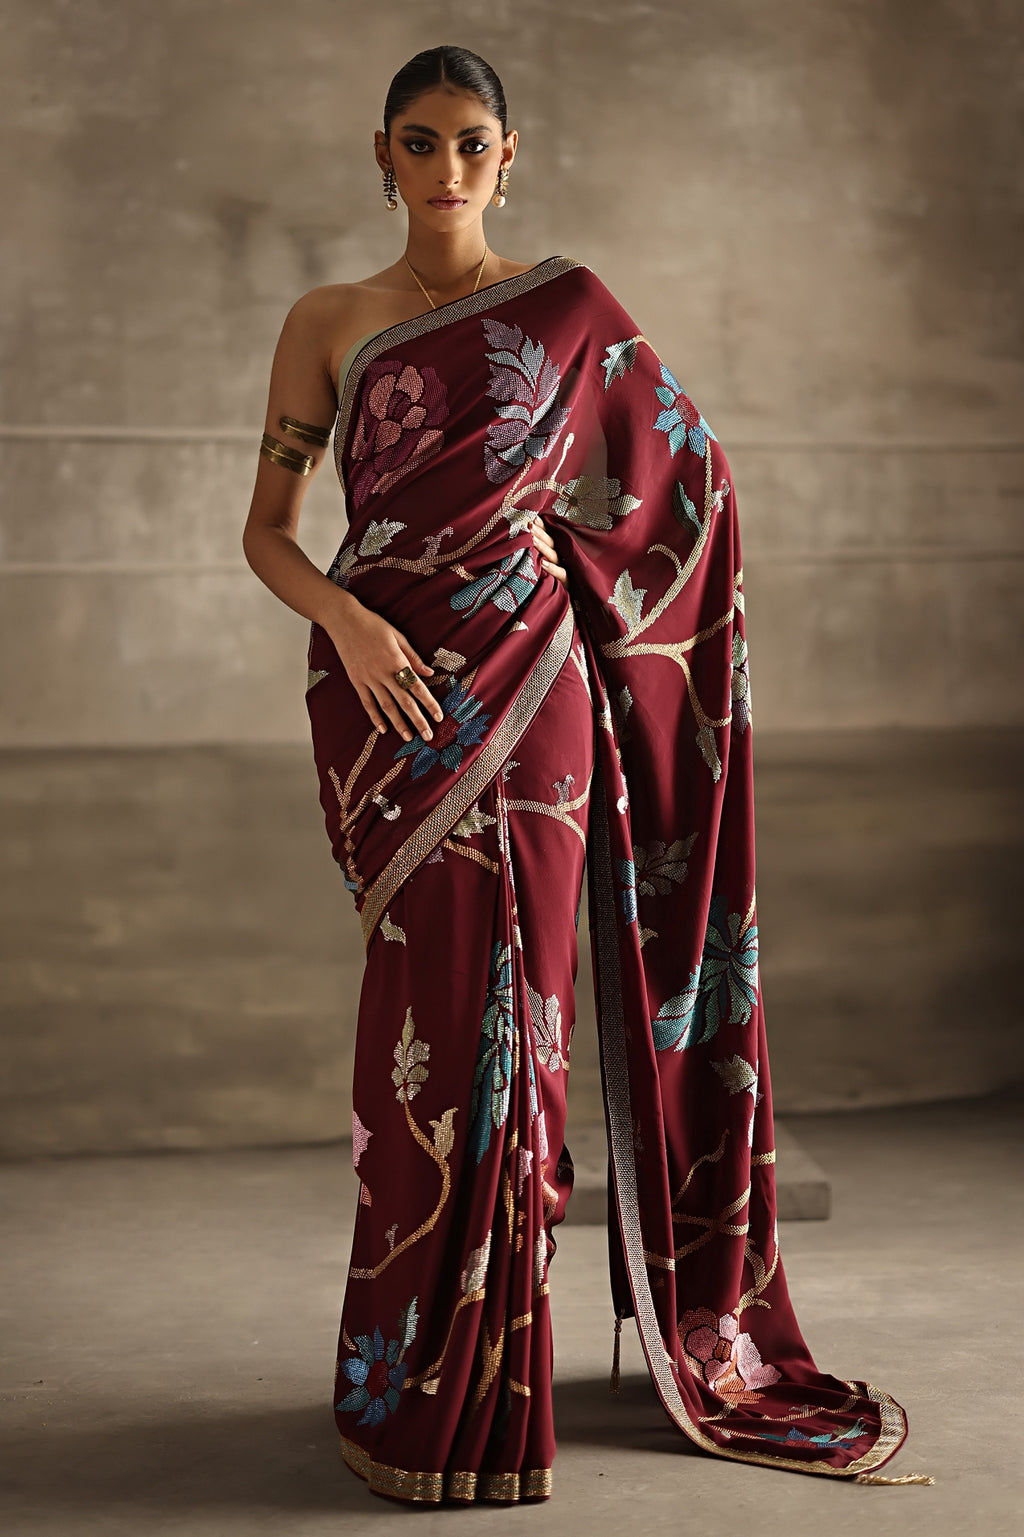 Aafrinish By Niazi Eshal Rahman Rizwan Ul Haq Deep Wine Cutdaana & Sequins Saree the rich hues of our deep wine Chiffon saree intricately detailed with floral motifs in glimmering sequins Pakistan Fashion